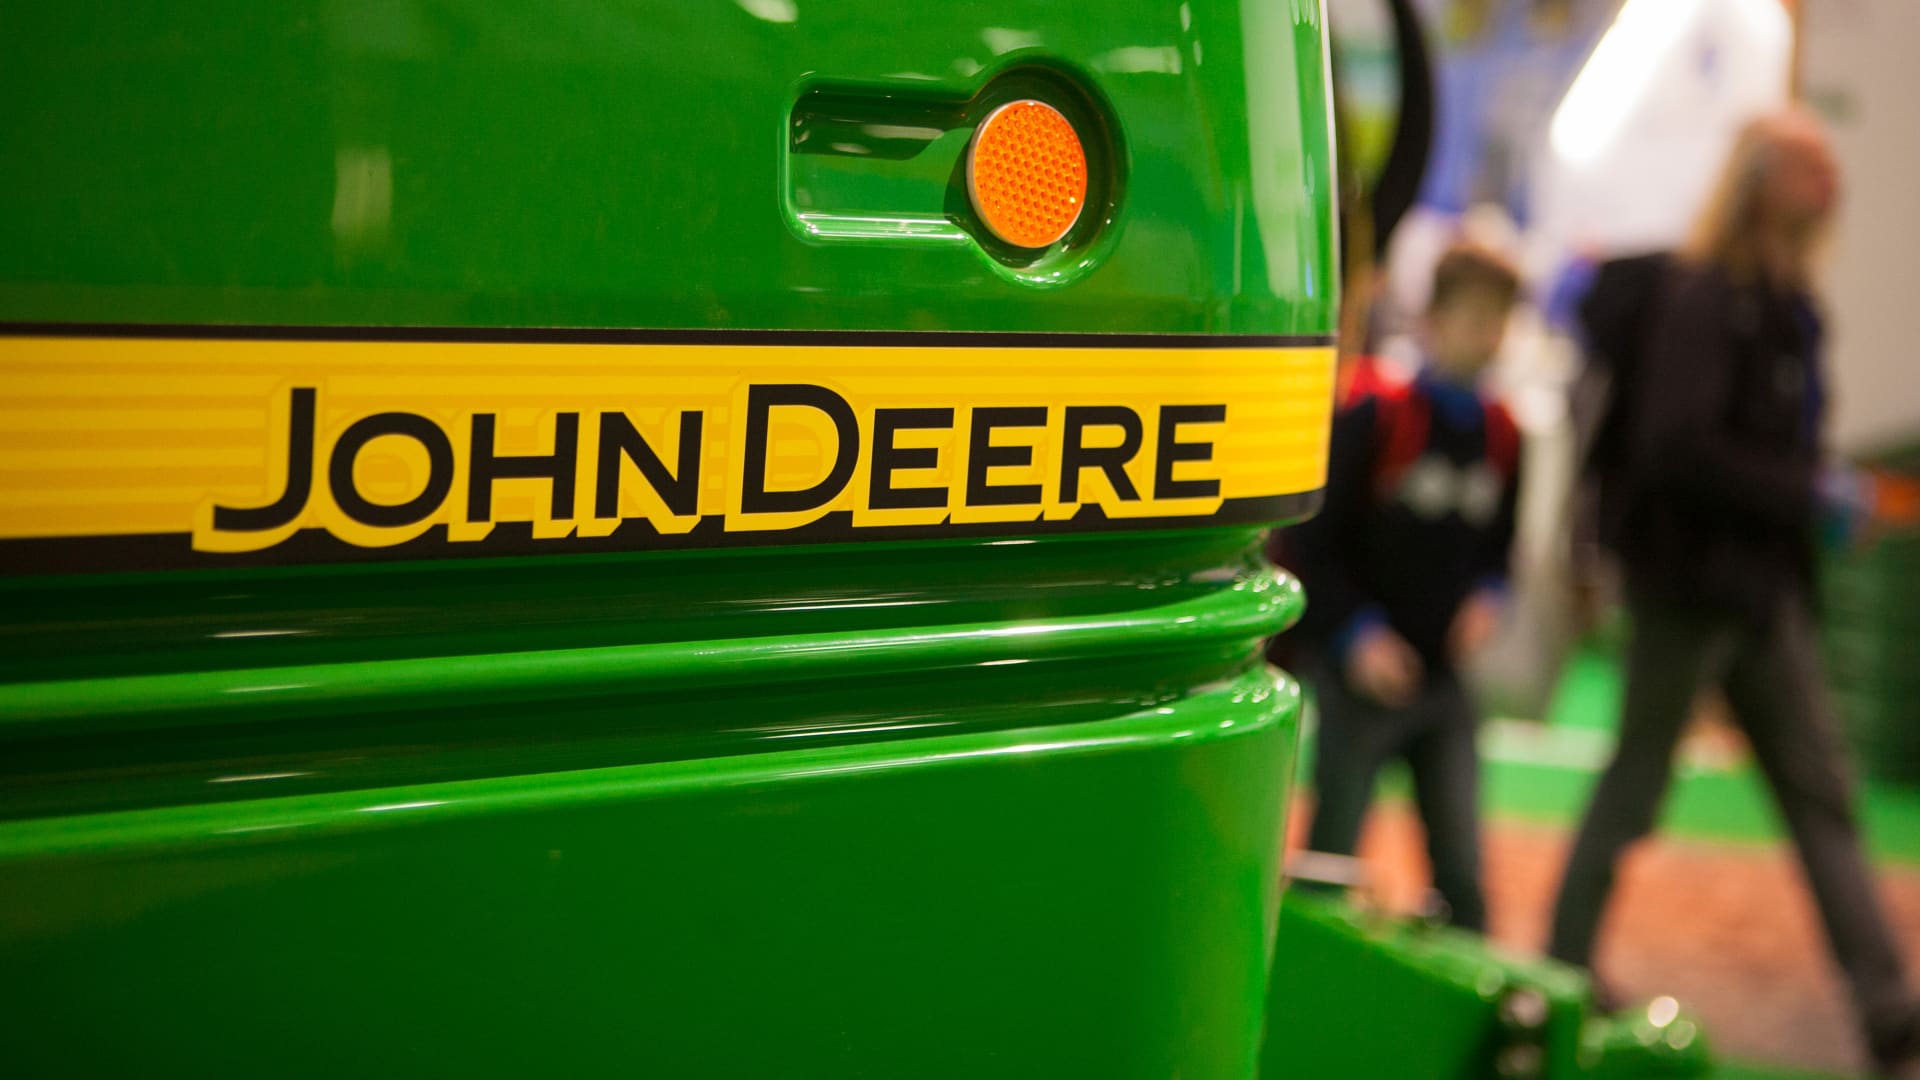 Jim Cramer says to pick up shares of Deere for an ‘absurd’ bargain